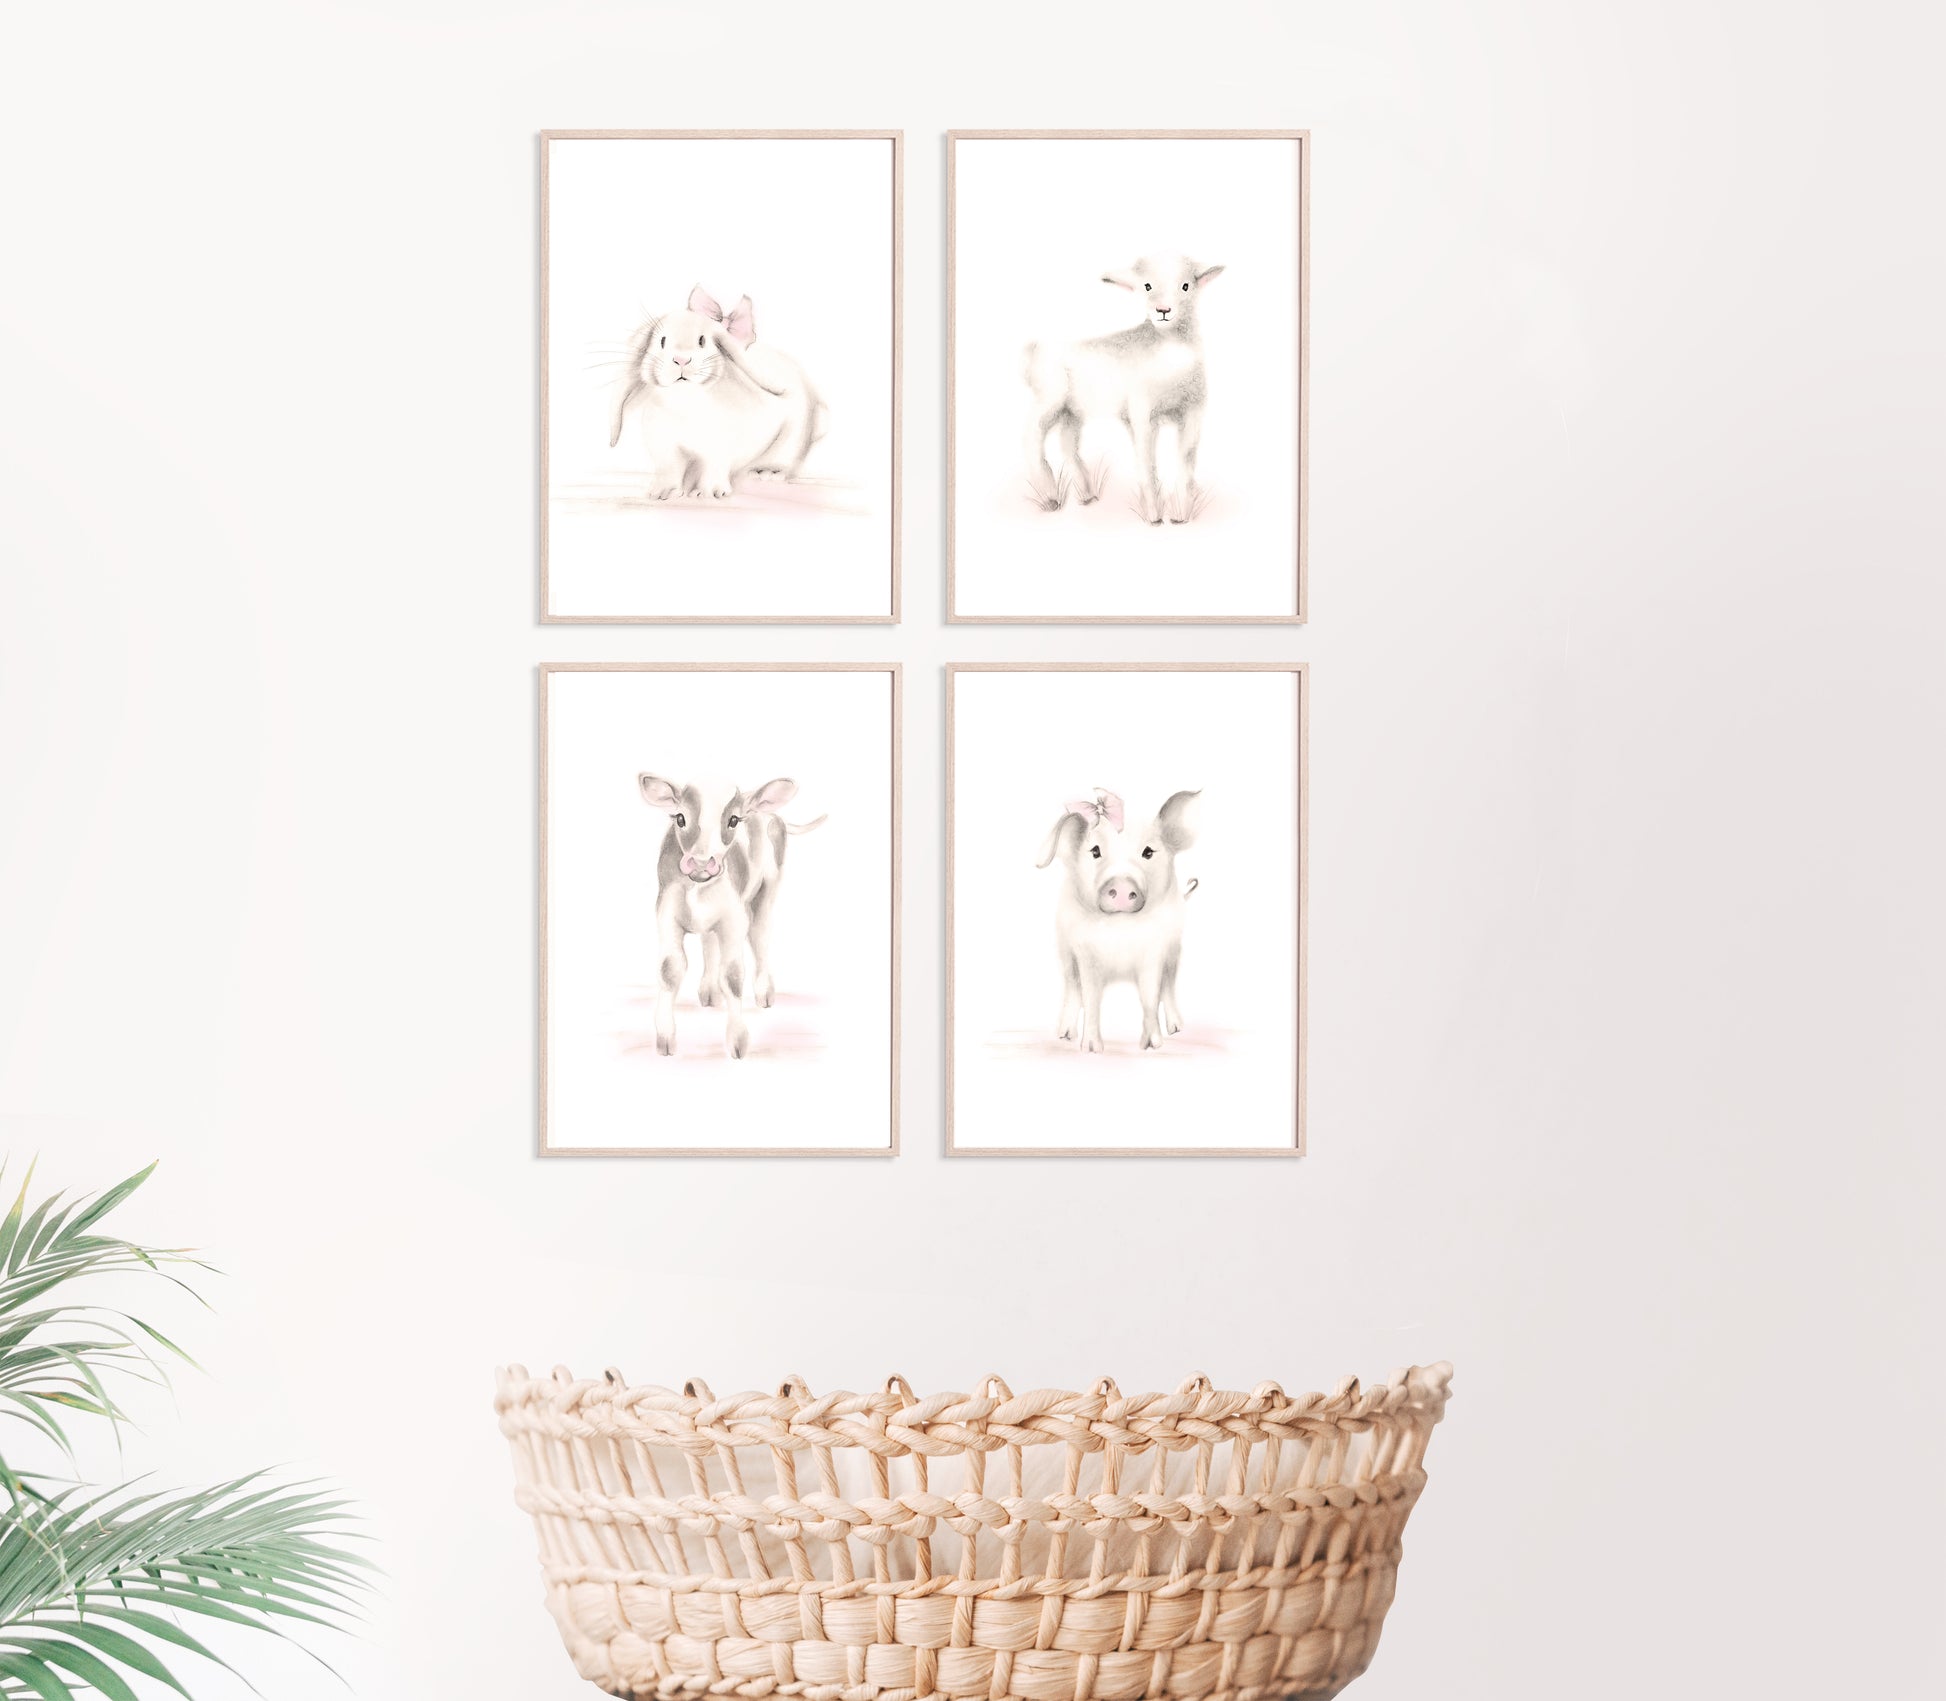 Set of 4 baby farm animal sketch prints in shades of beige and pink on white backgrounds. Prints are framed in light woodtone frames and hang on a plain wall above a baby basket basinette. Studio Q - Art by Nicky Quartermaine Scott